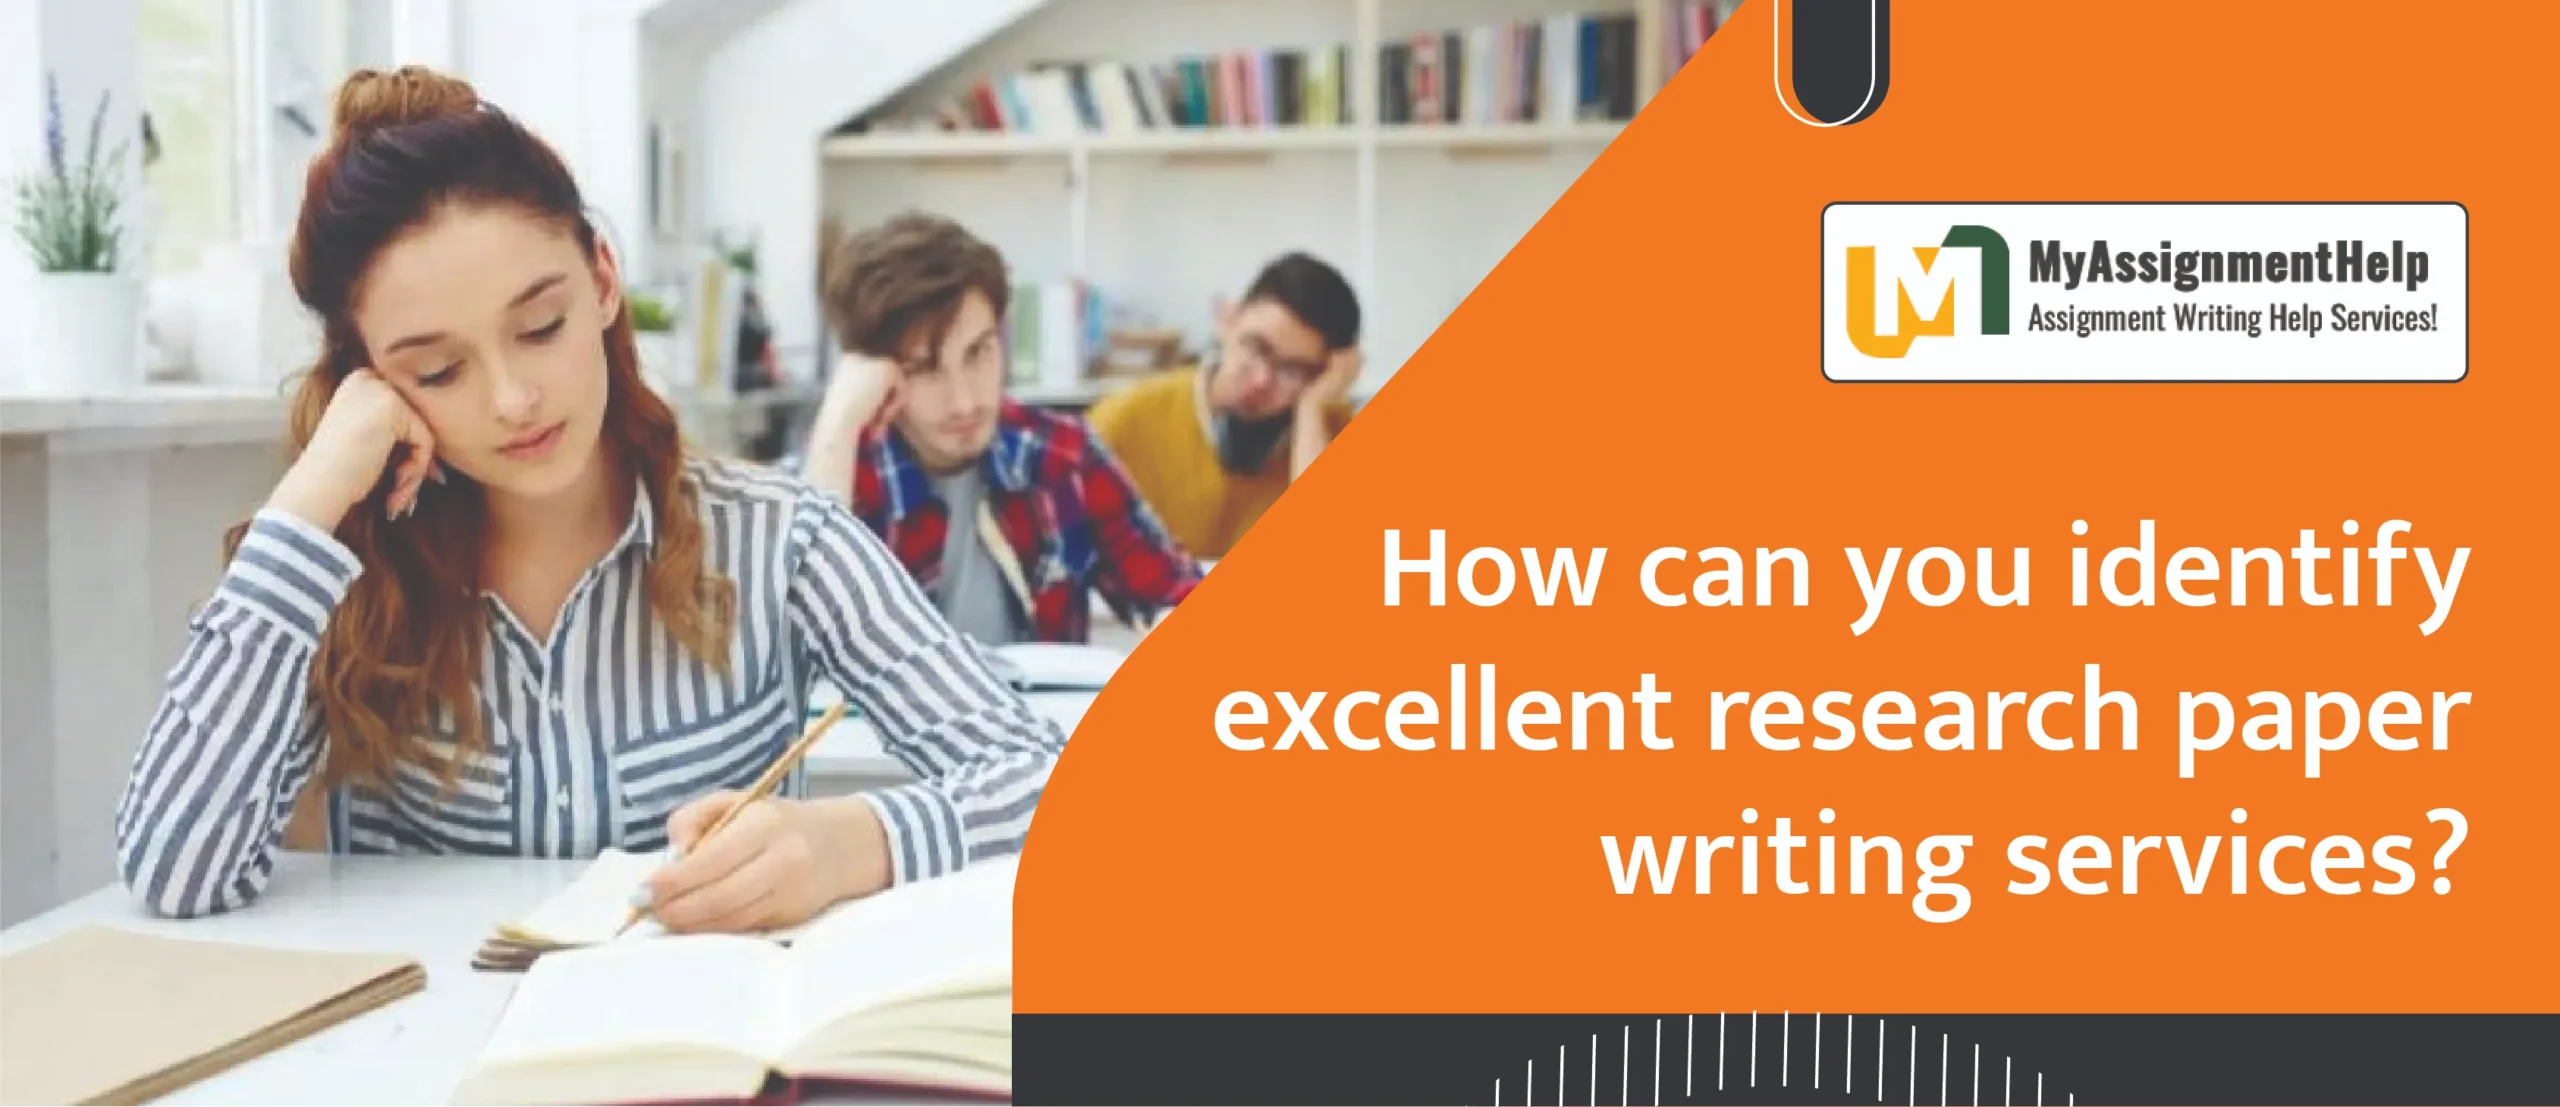 How can you identify excellent research paper writing services?